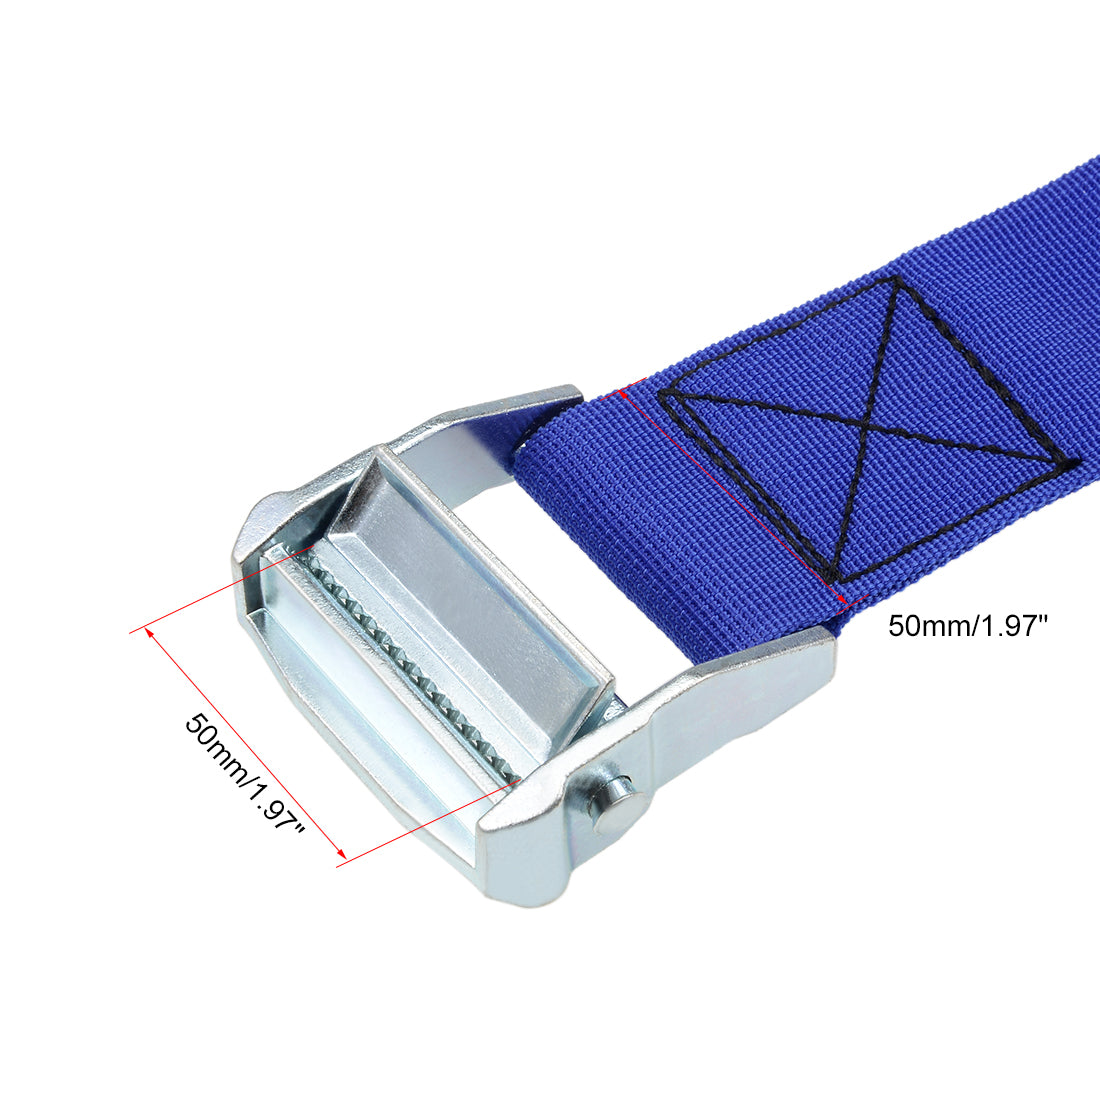 uxcell Uxcell 2.5M x 5cm Lashing Strap Cargo Tie Down Straps w Cam Lock Buckle 500Kg Work Load, Blue, 2Pcs